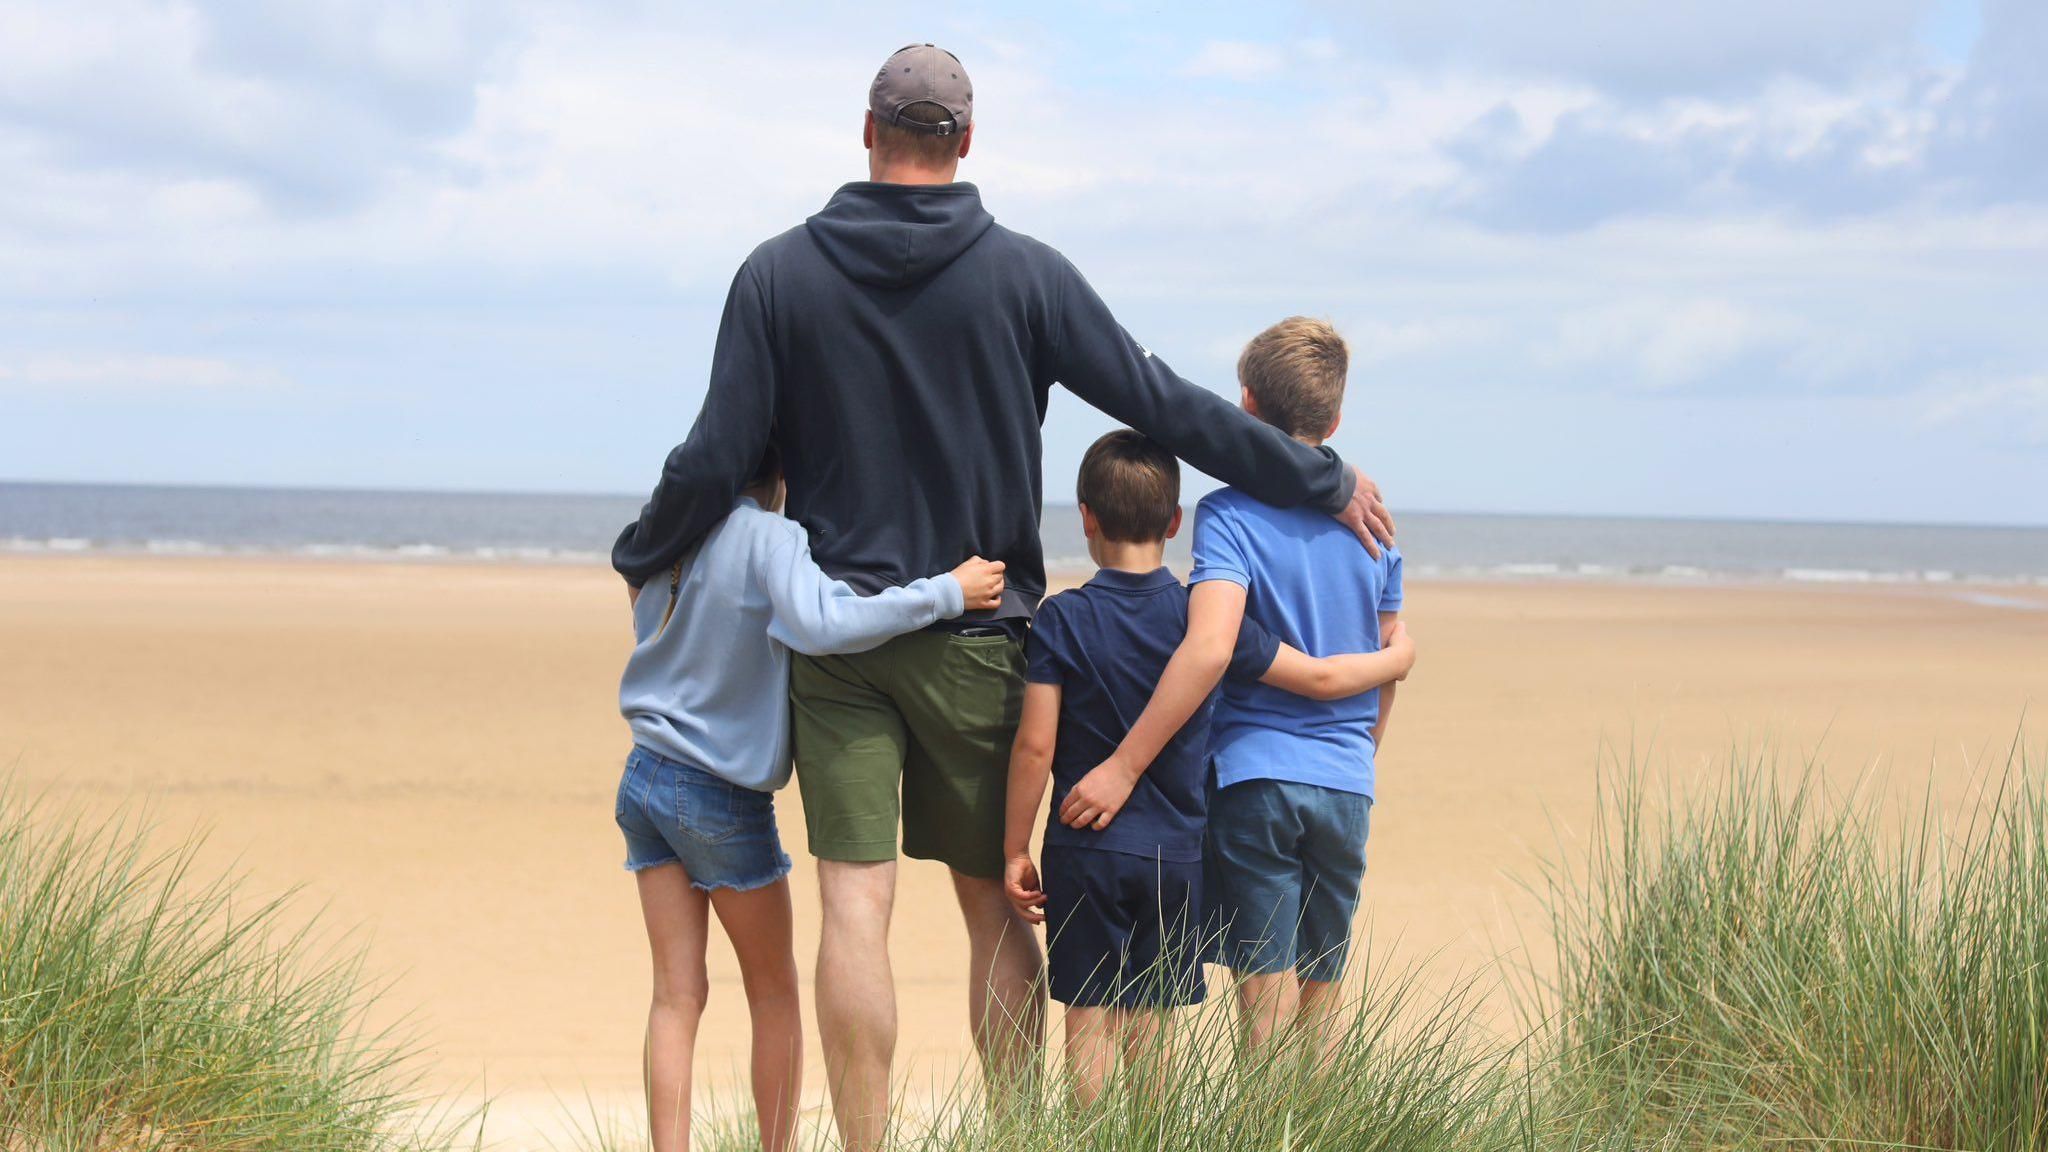 William and children on a beach looking out to sea